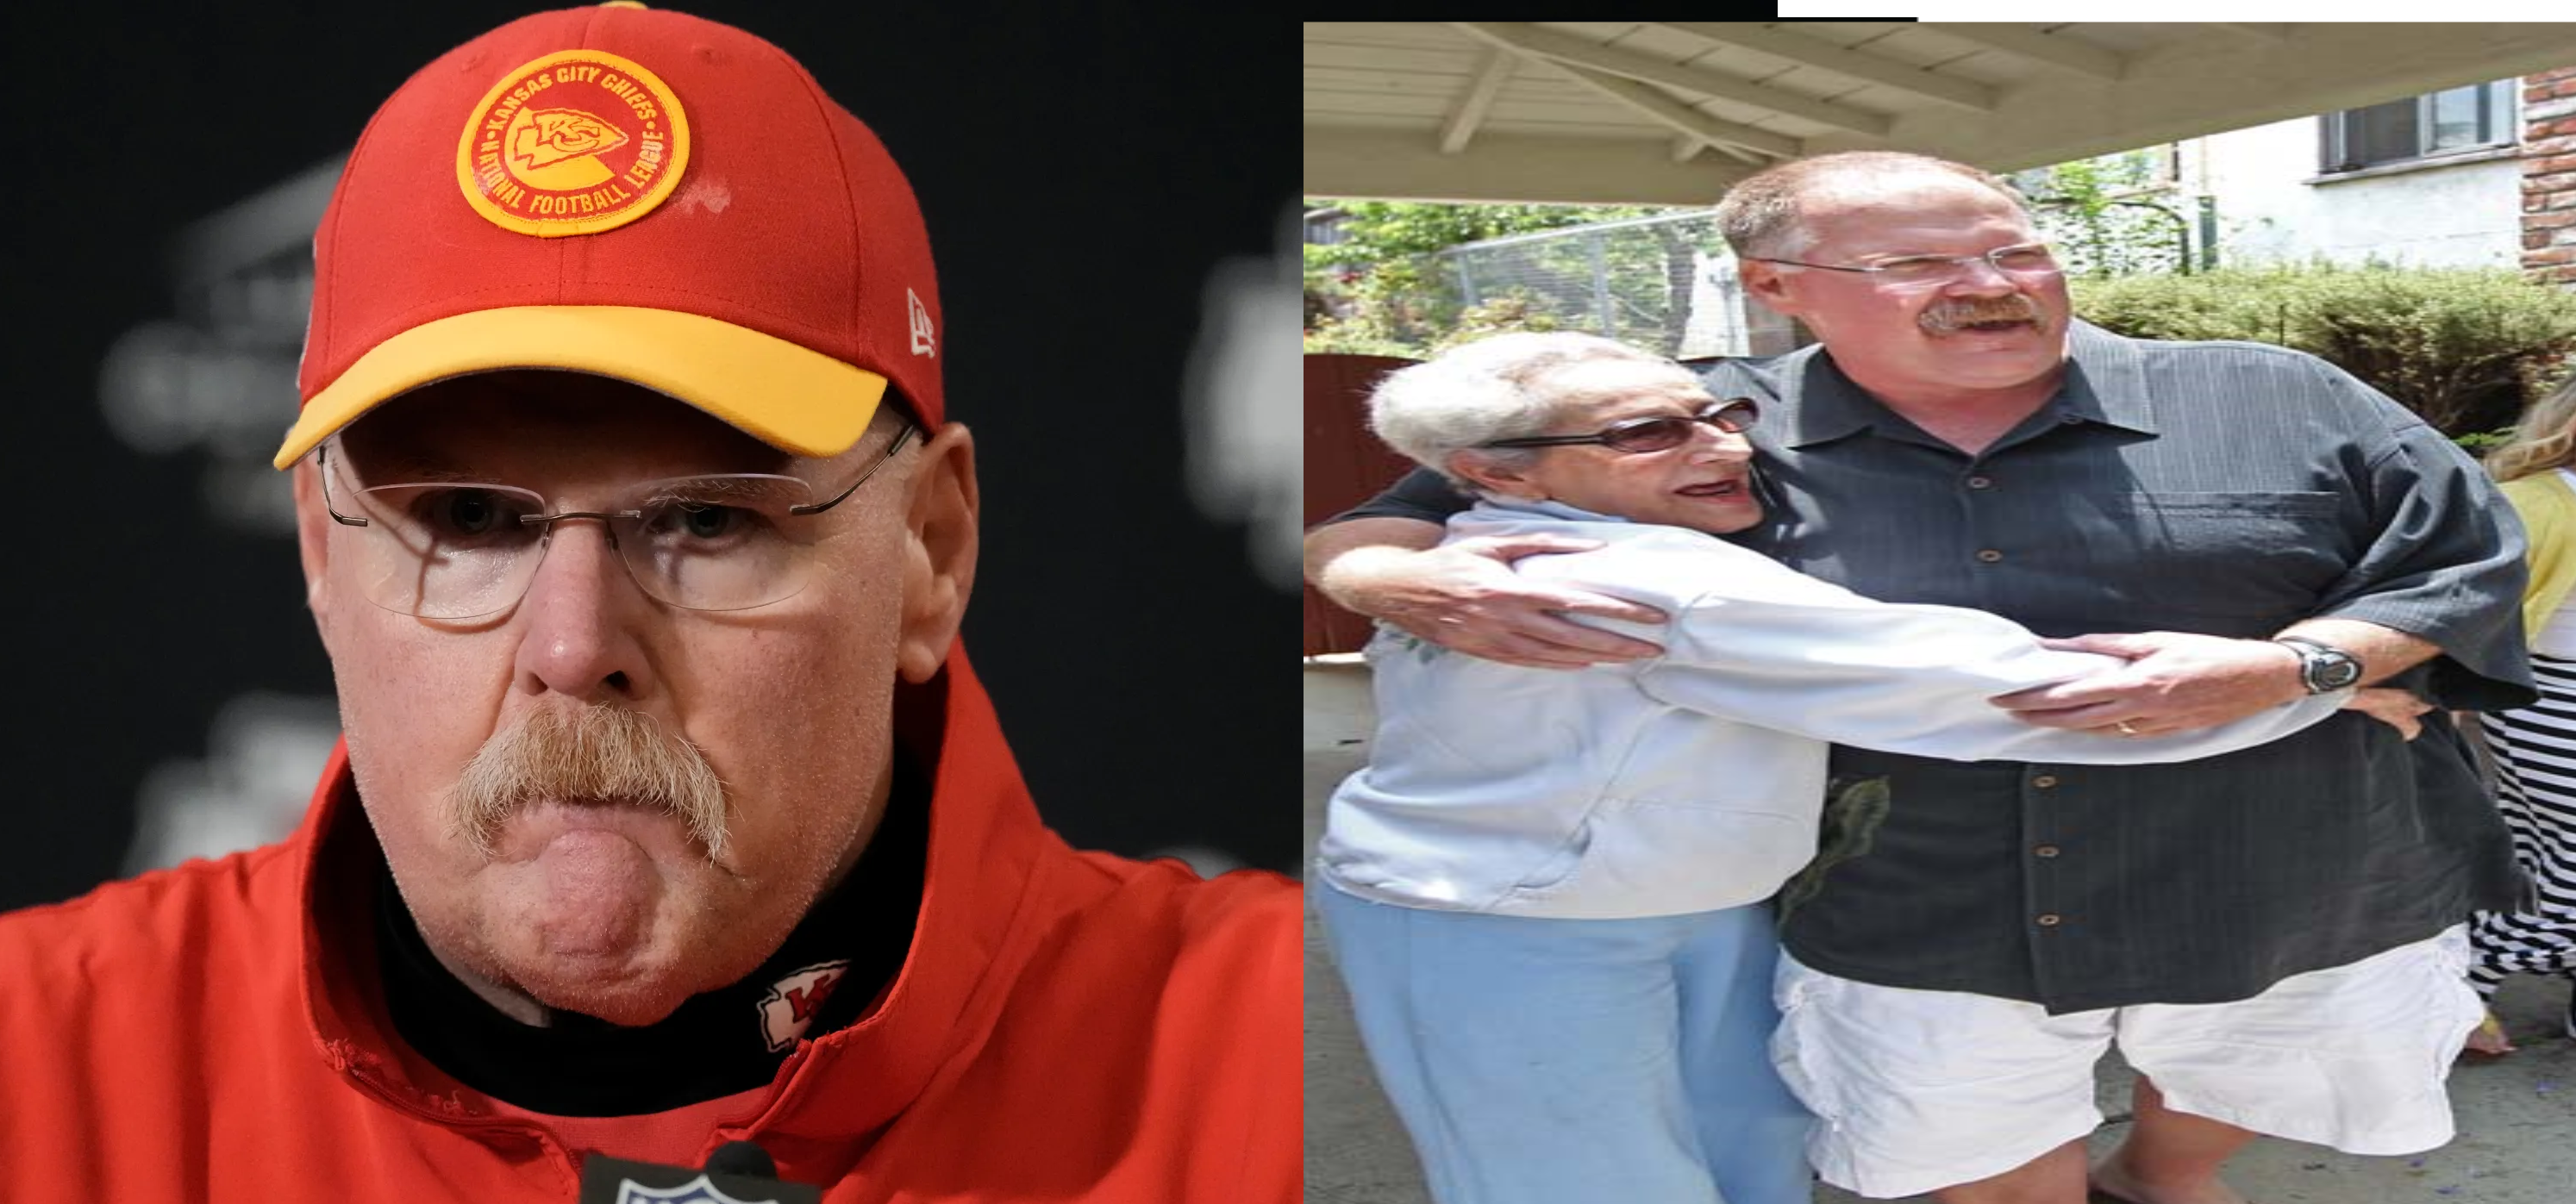 “I can’t believe she’s gone. She meant everything to me,” Chiefs’ Andy Reid tearfully announced his mother’s passing just days after her 105th birthday.